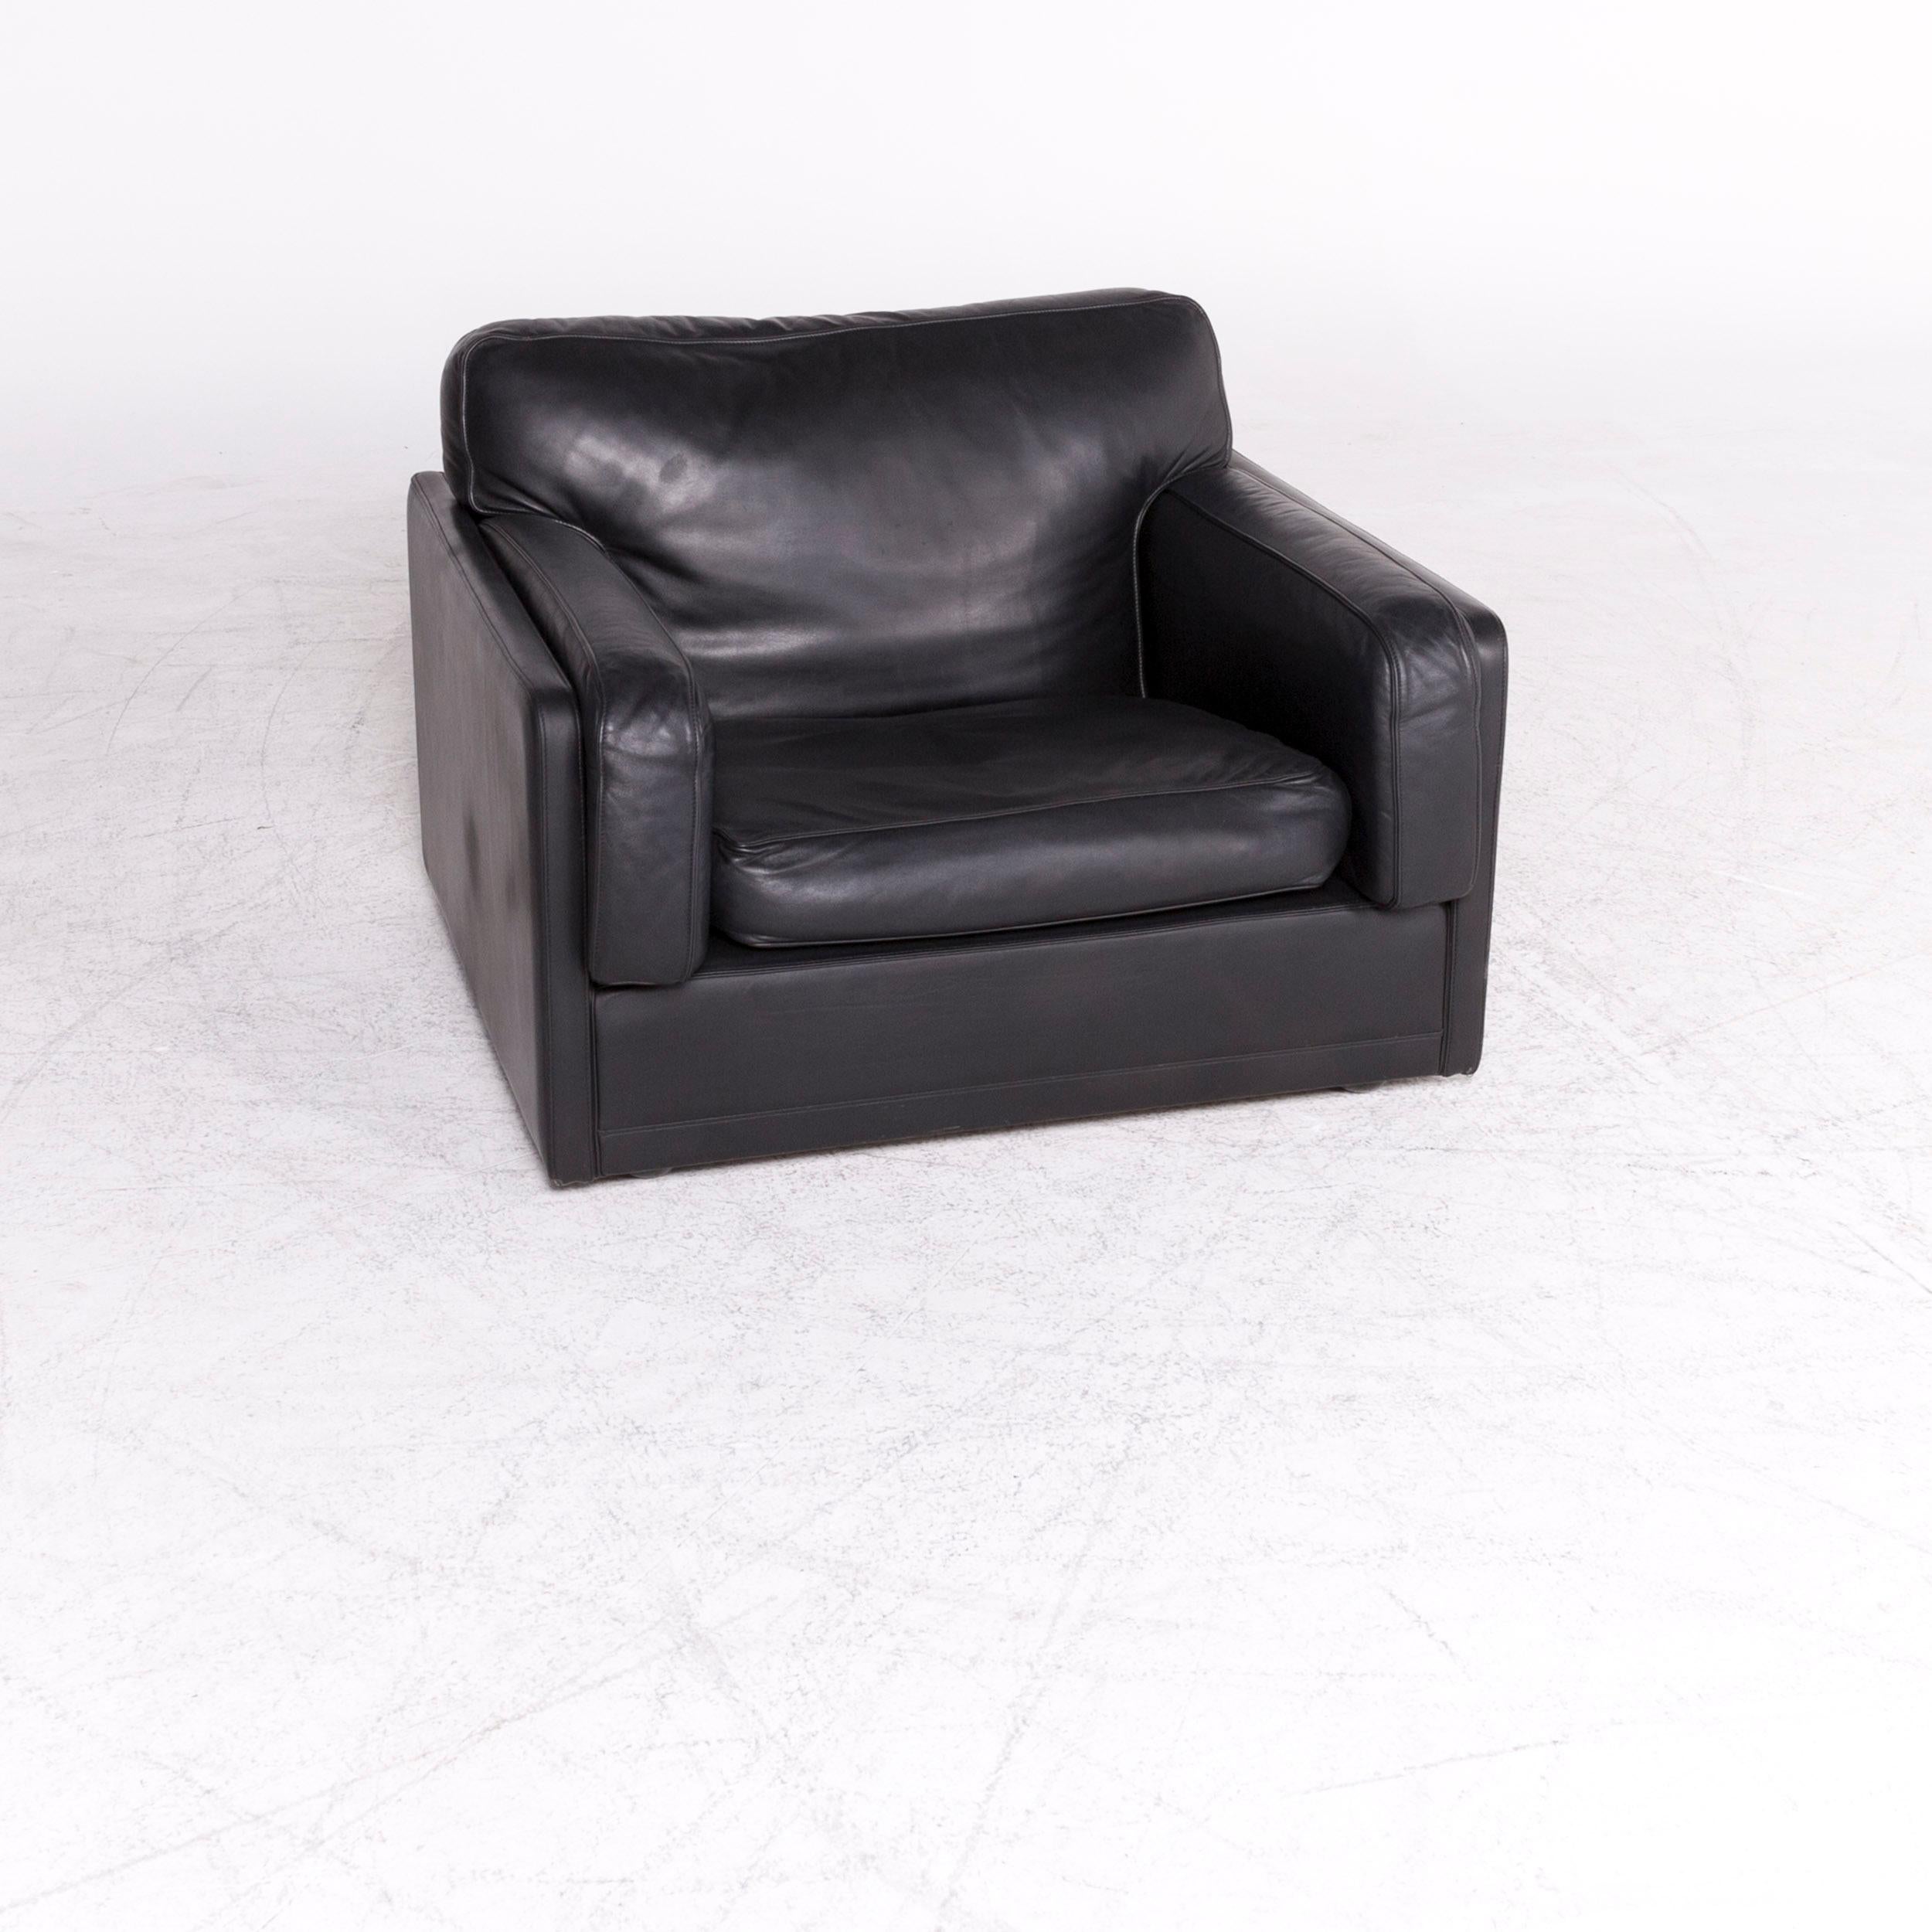 We bring to you a Poltrona Frau Socrate designer leather armchair black genuine leather chair.
 
Product measures in centimeters:

Depth: 96
Width: 100
Height: 73
Seat-height: 42
Rest-height: 55
Seat-depth: 51
Seat-width: 64
Back-height: